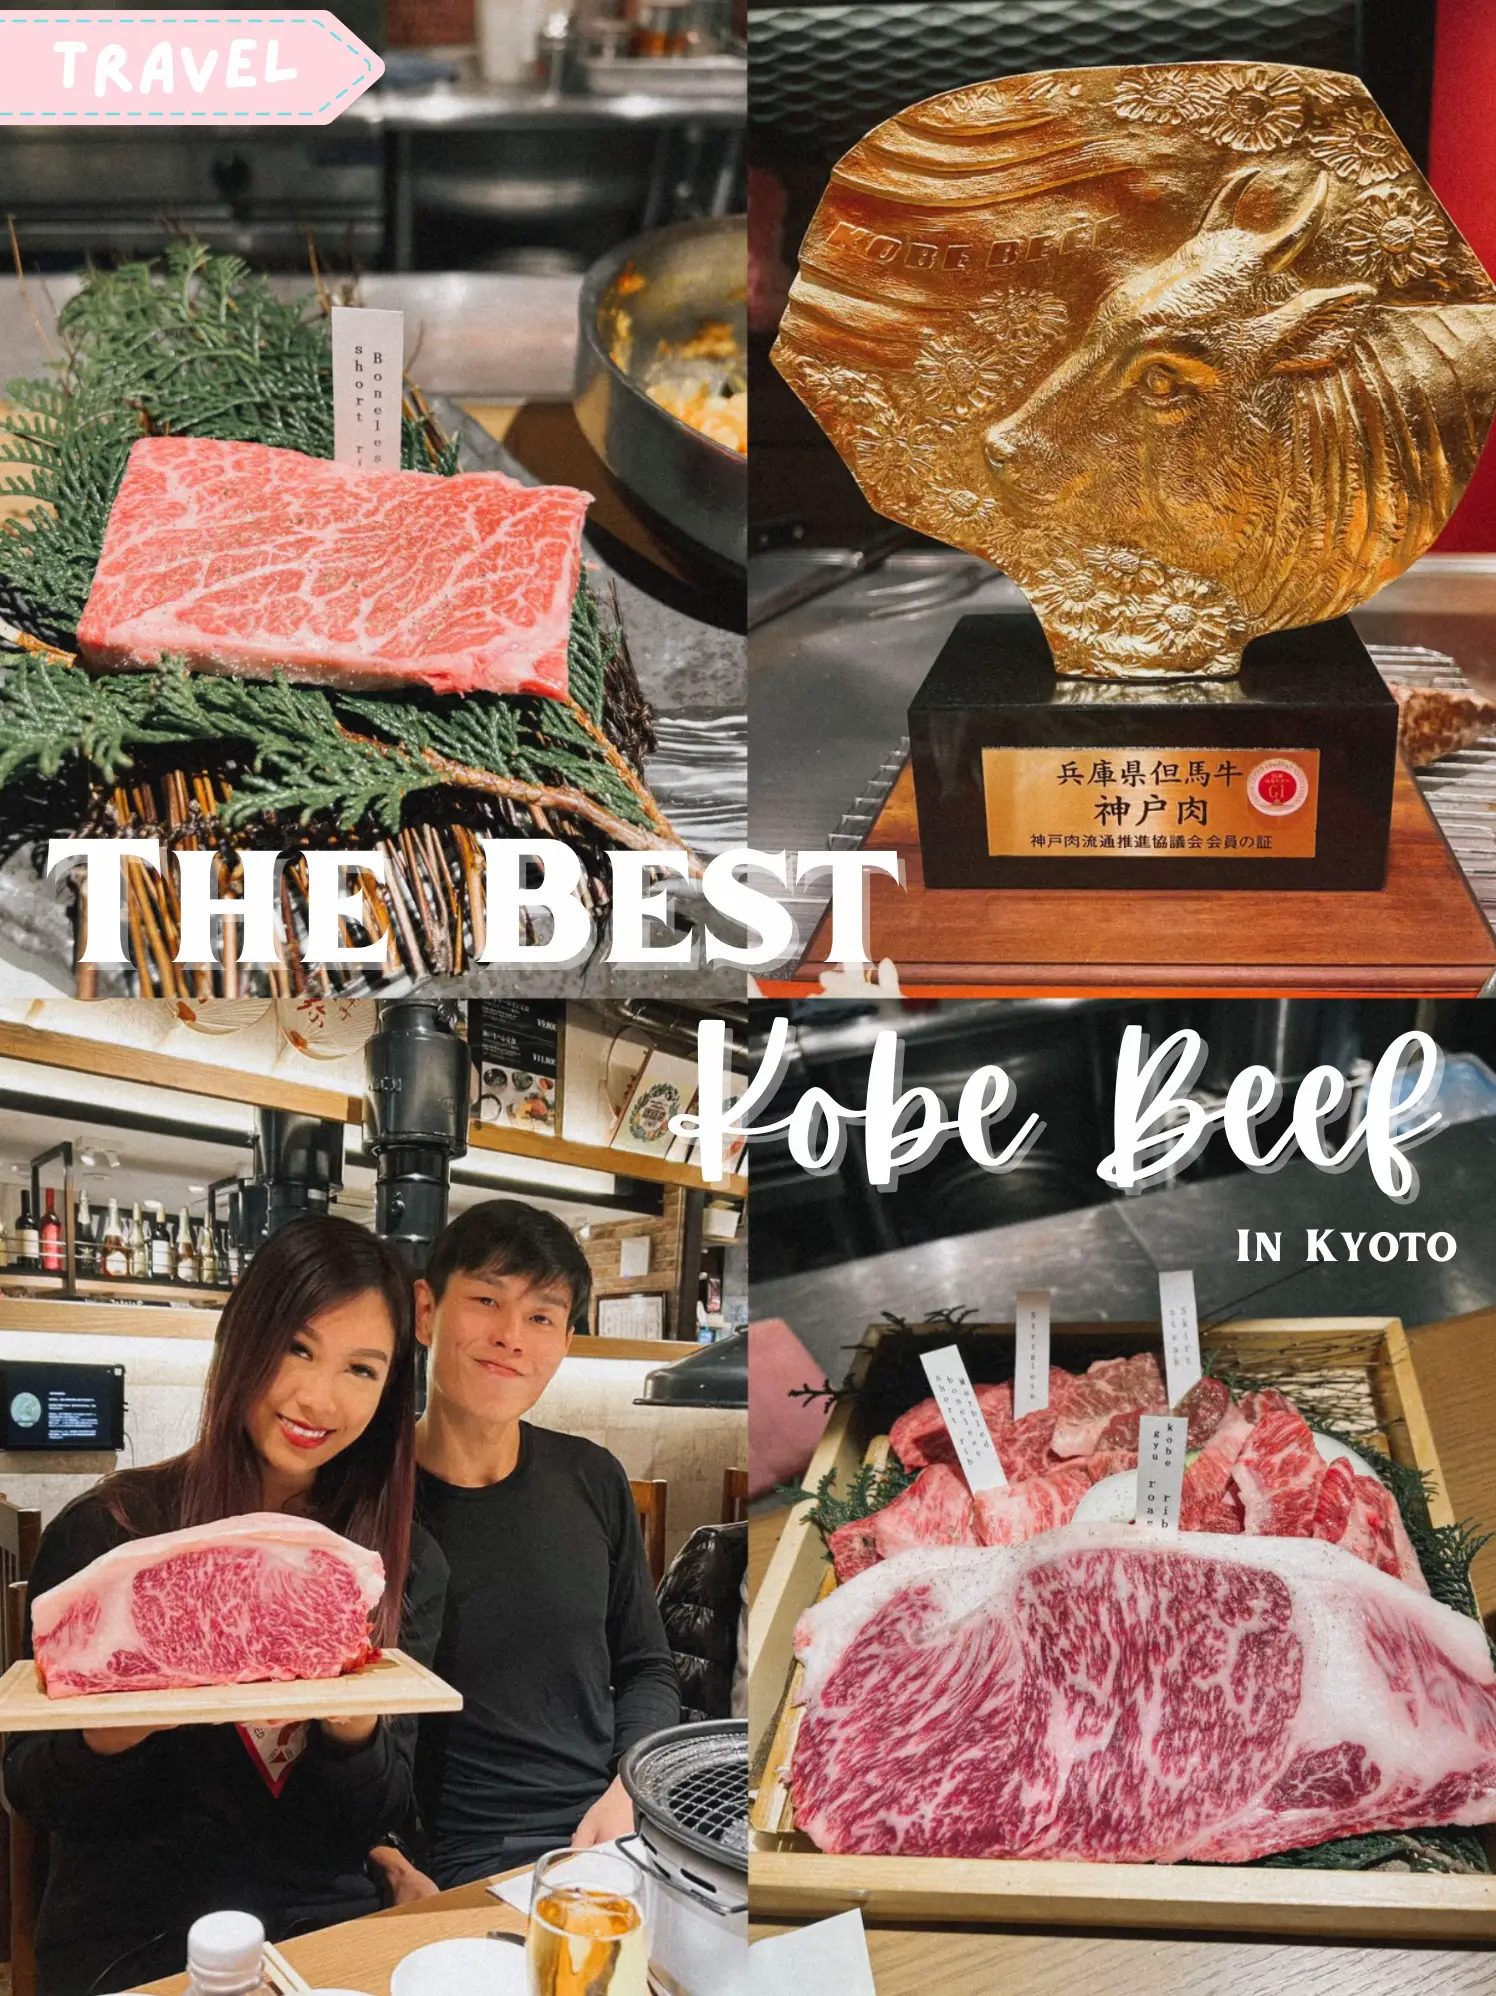 Japanese Wagyu Beef A4 Ribeye Special - Buy 4 get 1 free - super farm foods.